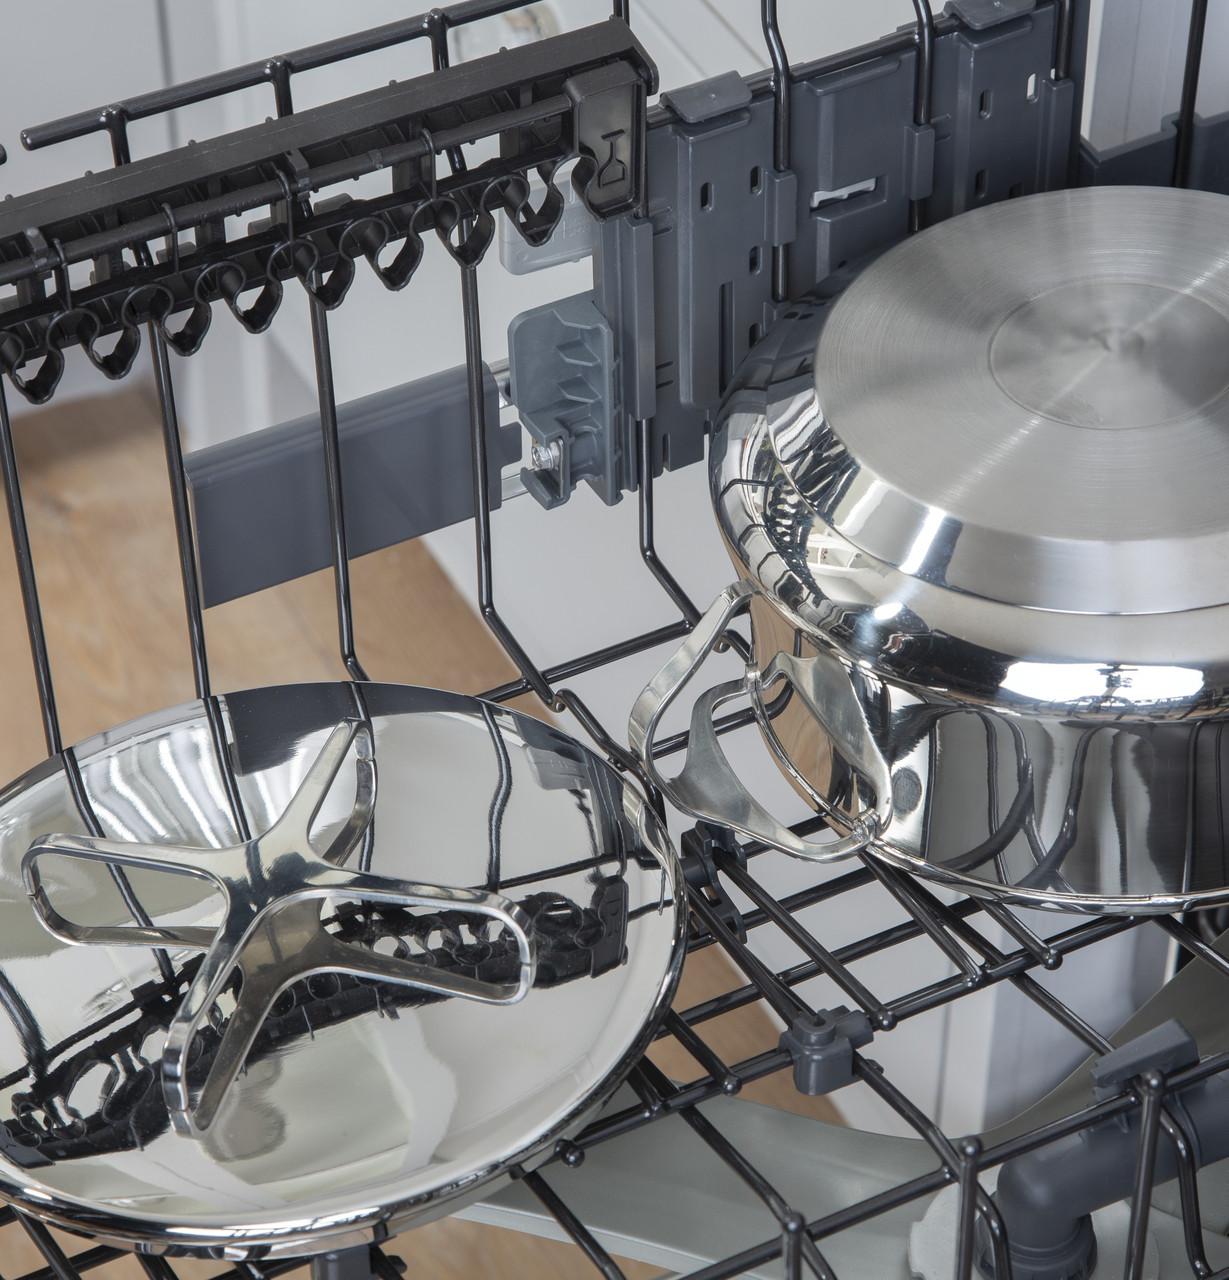 Caf(eback)™ Stainless Steel Interior Dishwasher with Sanitize and Ultra Wash & Dry in Platinum Glass